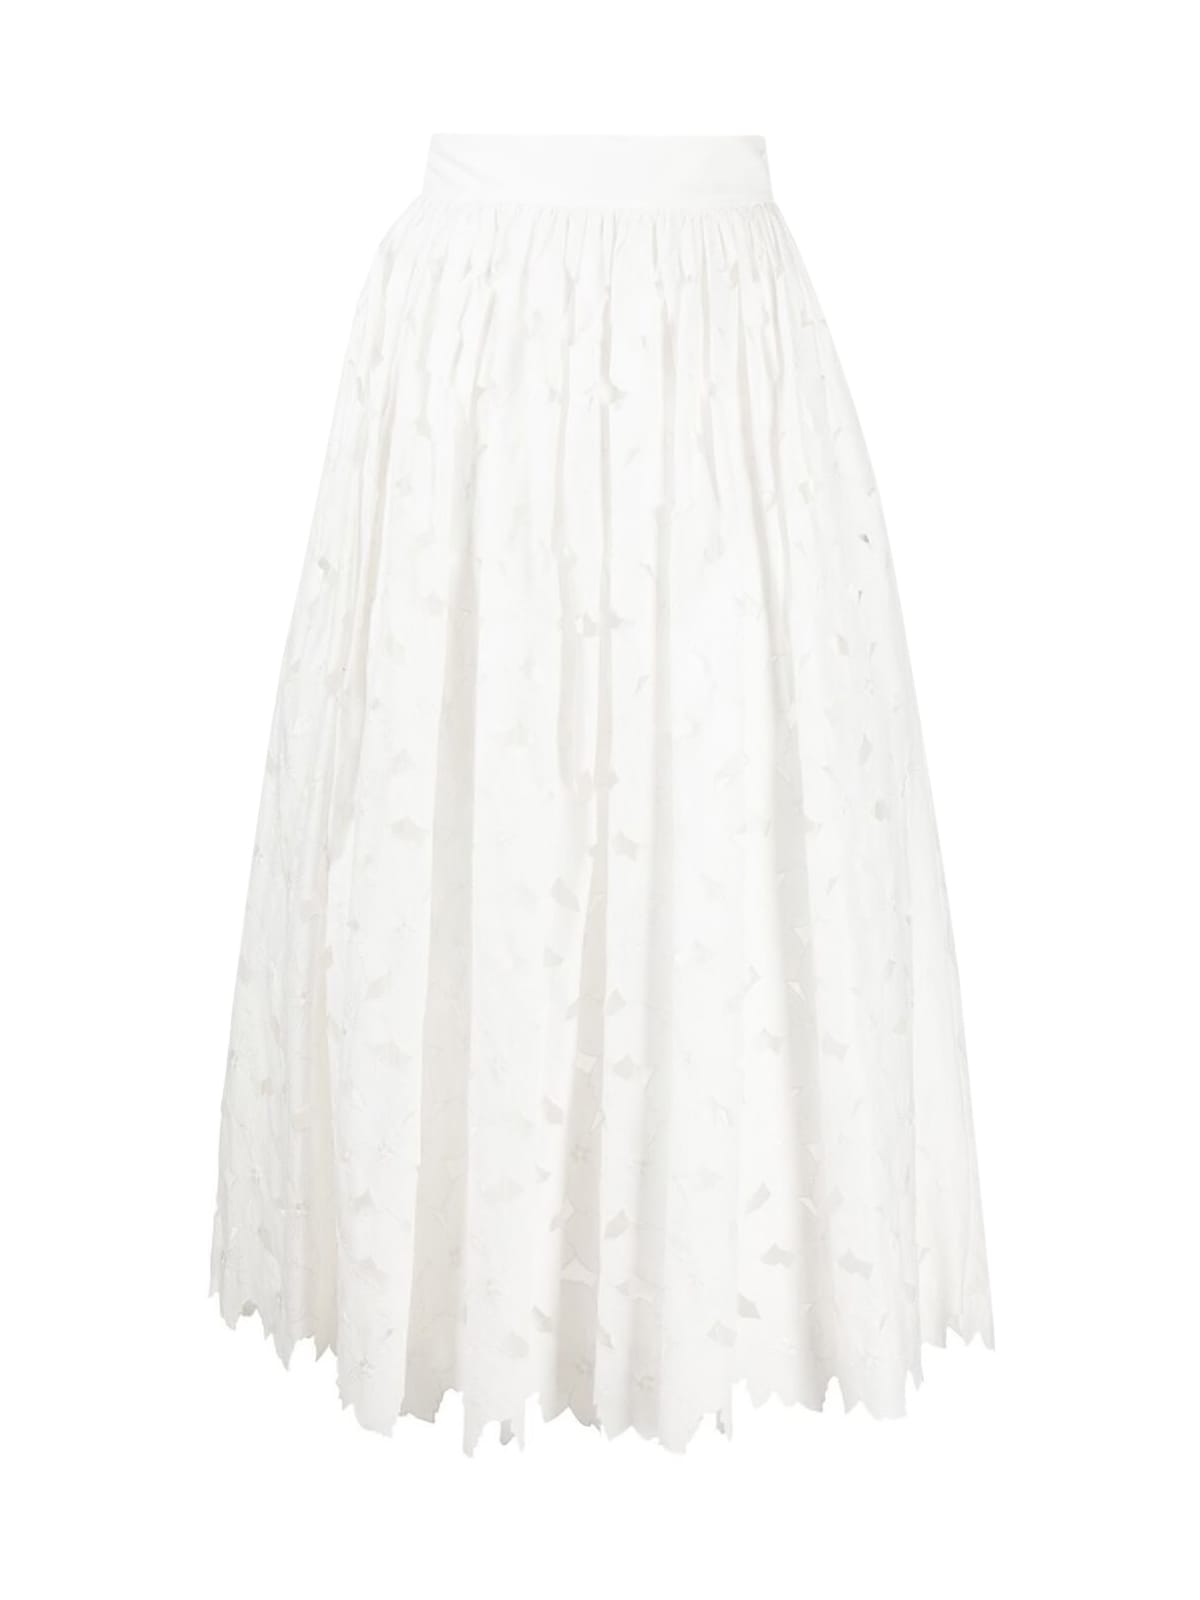 RED Valentino Cut-out Midi Skirt